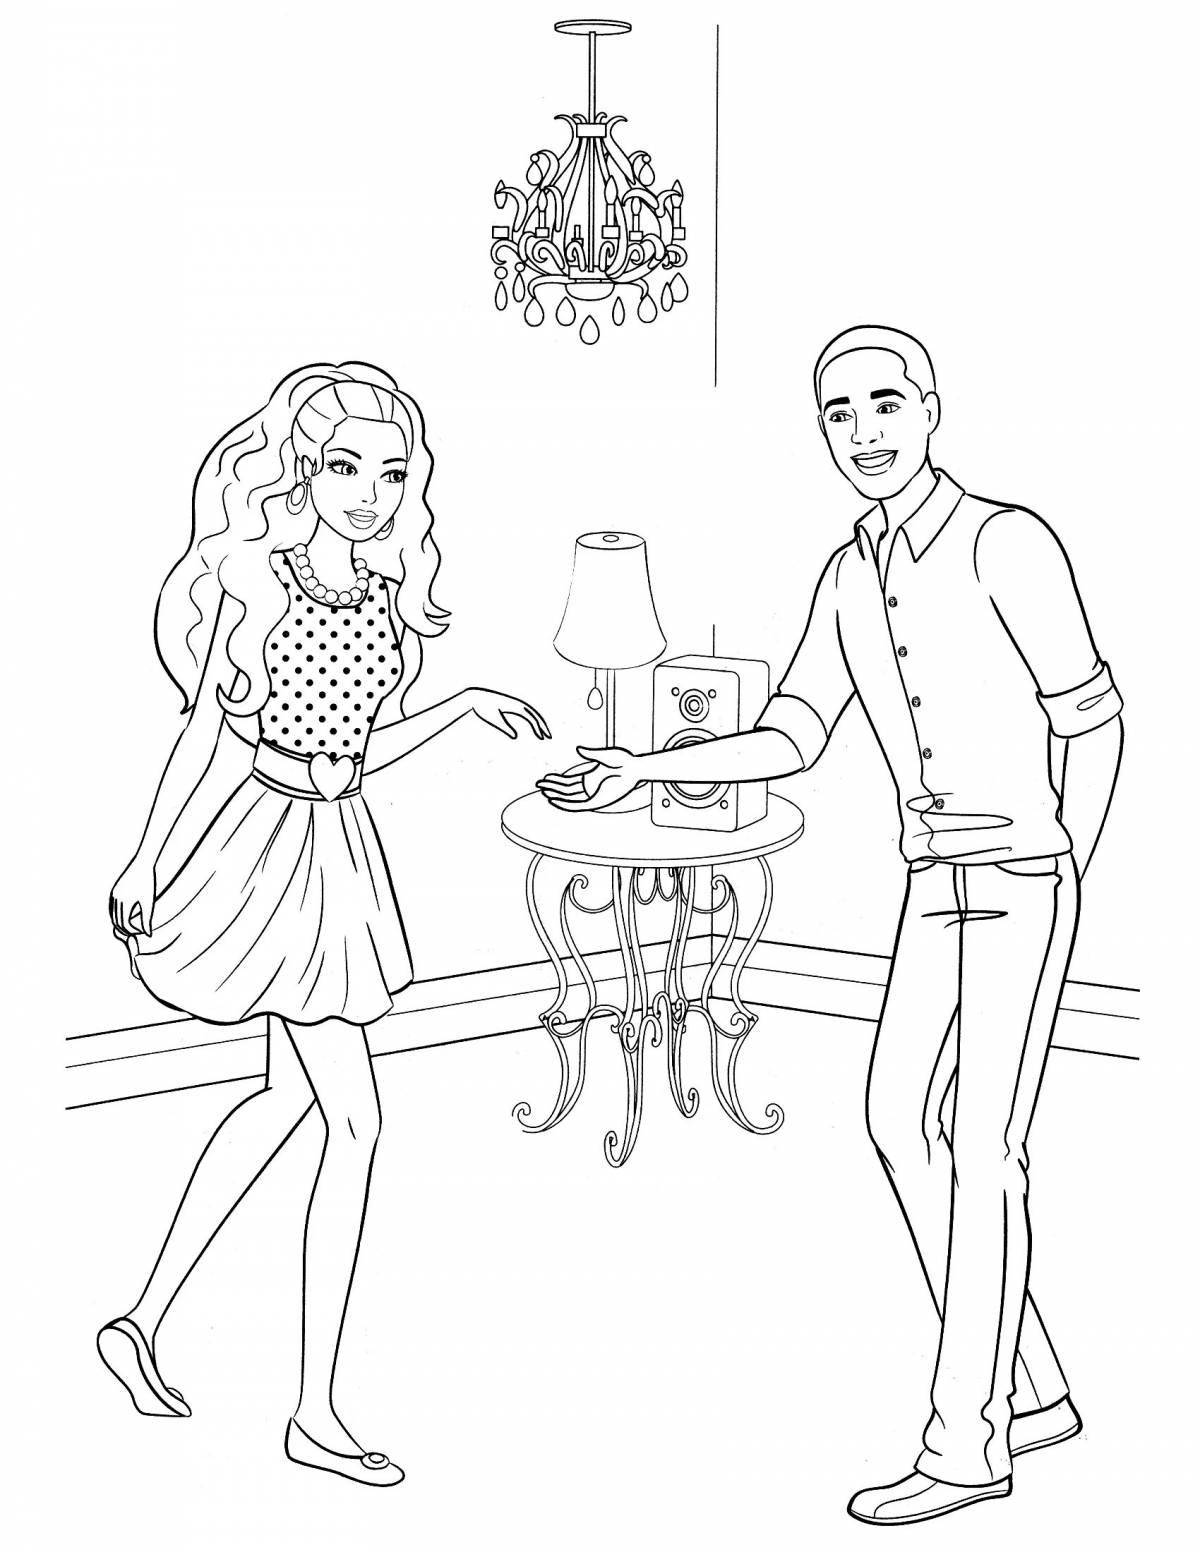 Fun coloring barbie and ken for girls